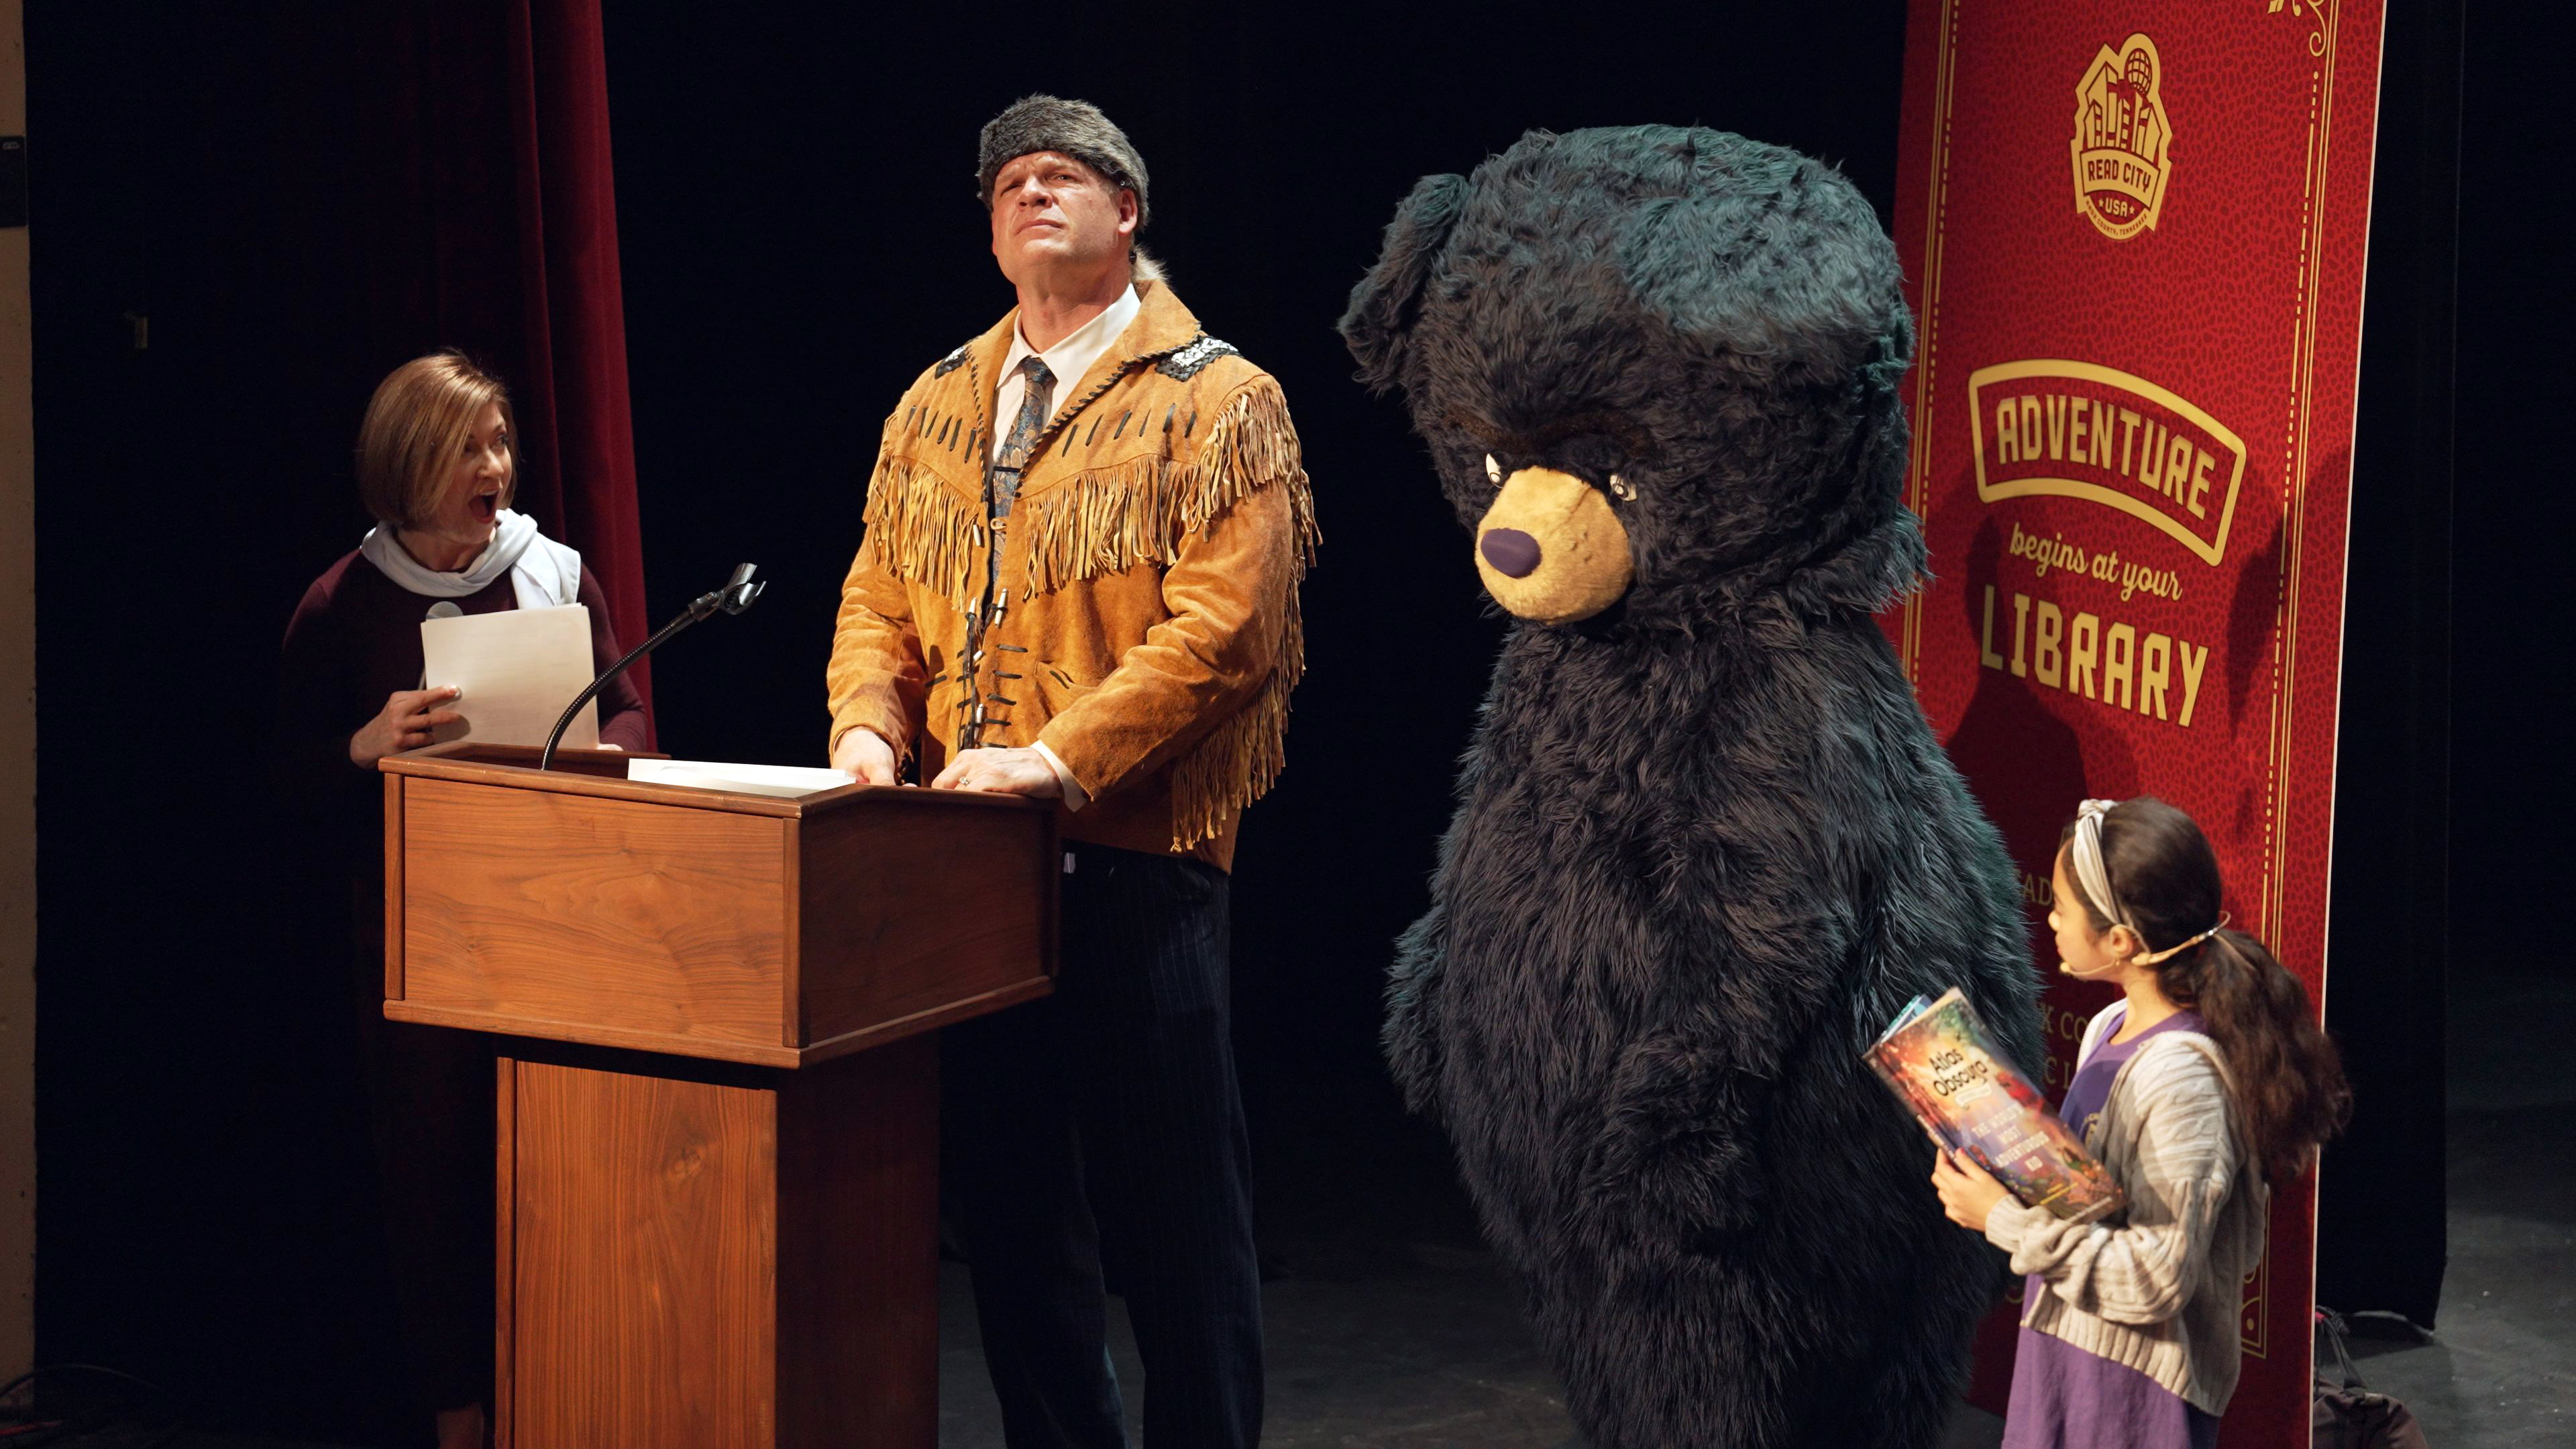 Mayor Glenn Jacobs wears a fringed frontier jacket with a costume bear character